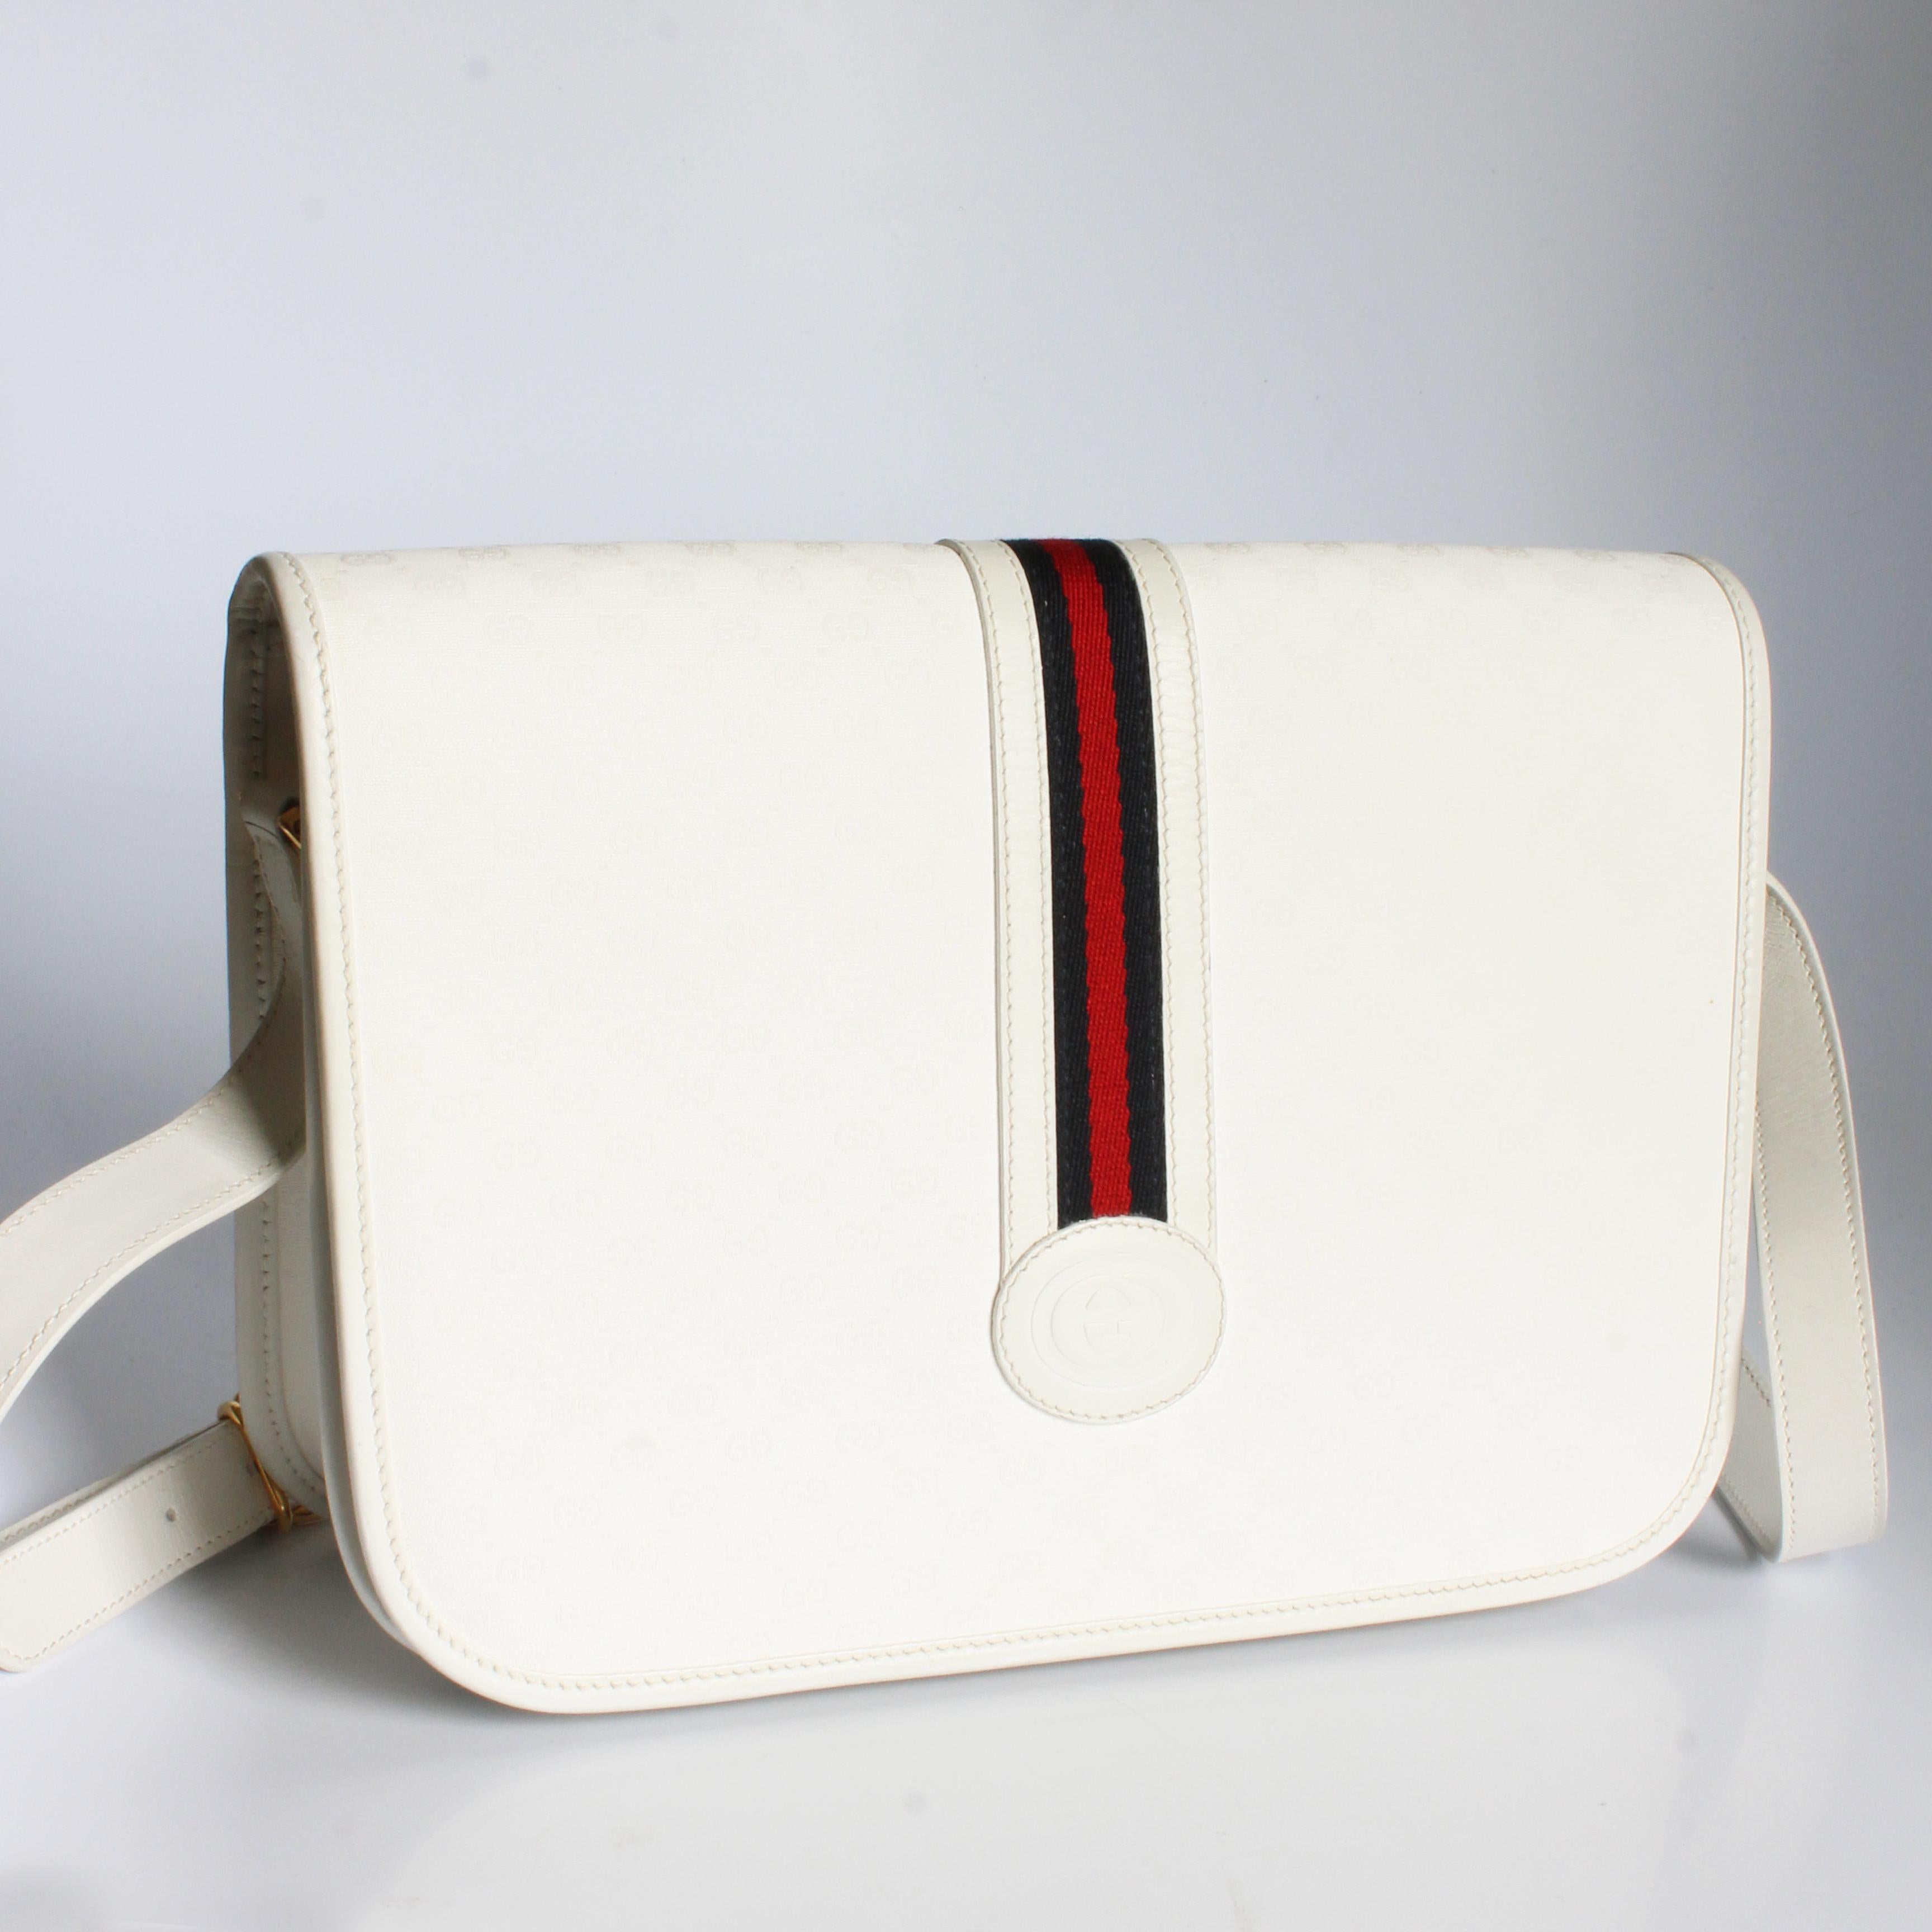 Authentic, preowned, vintage Gucci shoulder bag, likely made in the late 70s.  Made from white GG coated canvas, it's trimmed in white leather and has Gucci's signature webbing and GG logo on the front flap.  It fastens with a magnetic snap, has